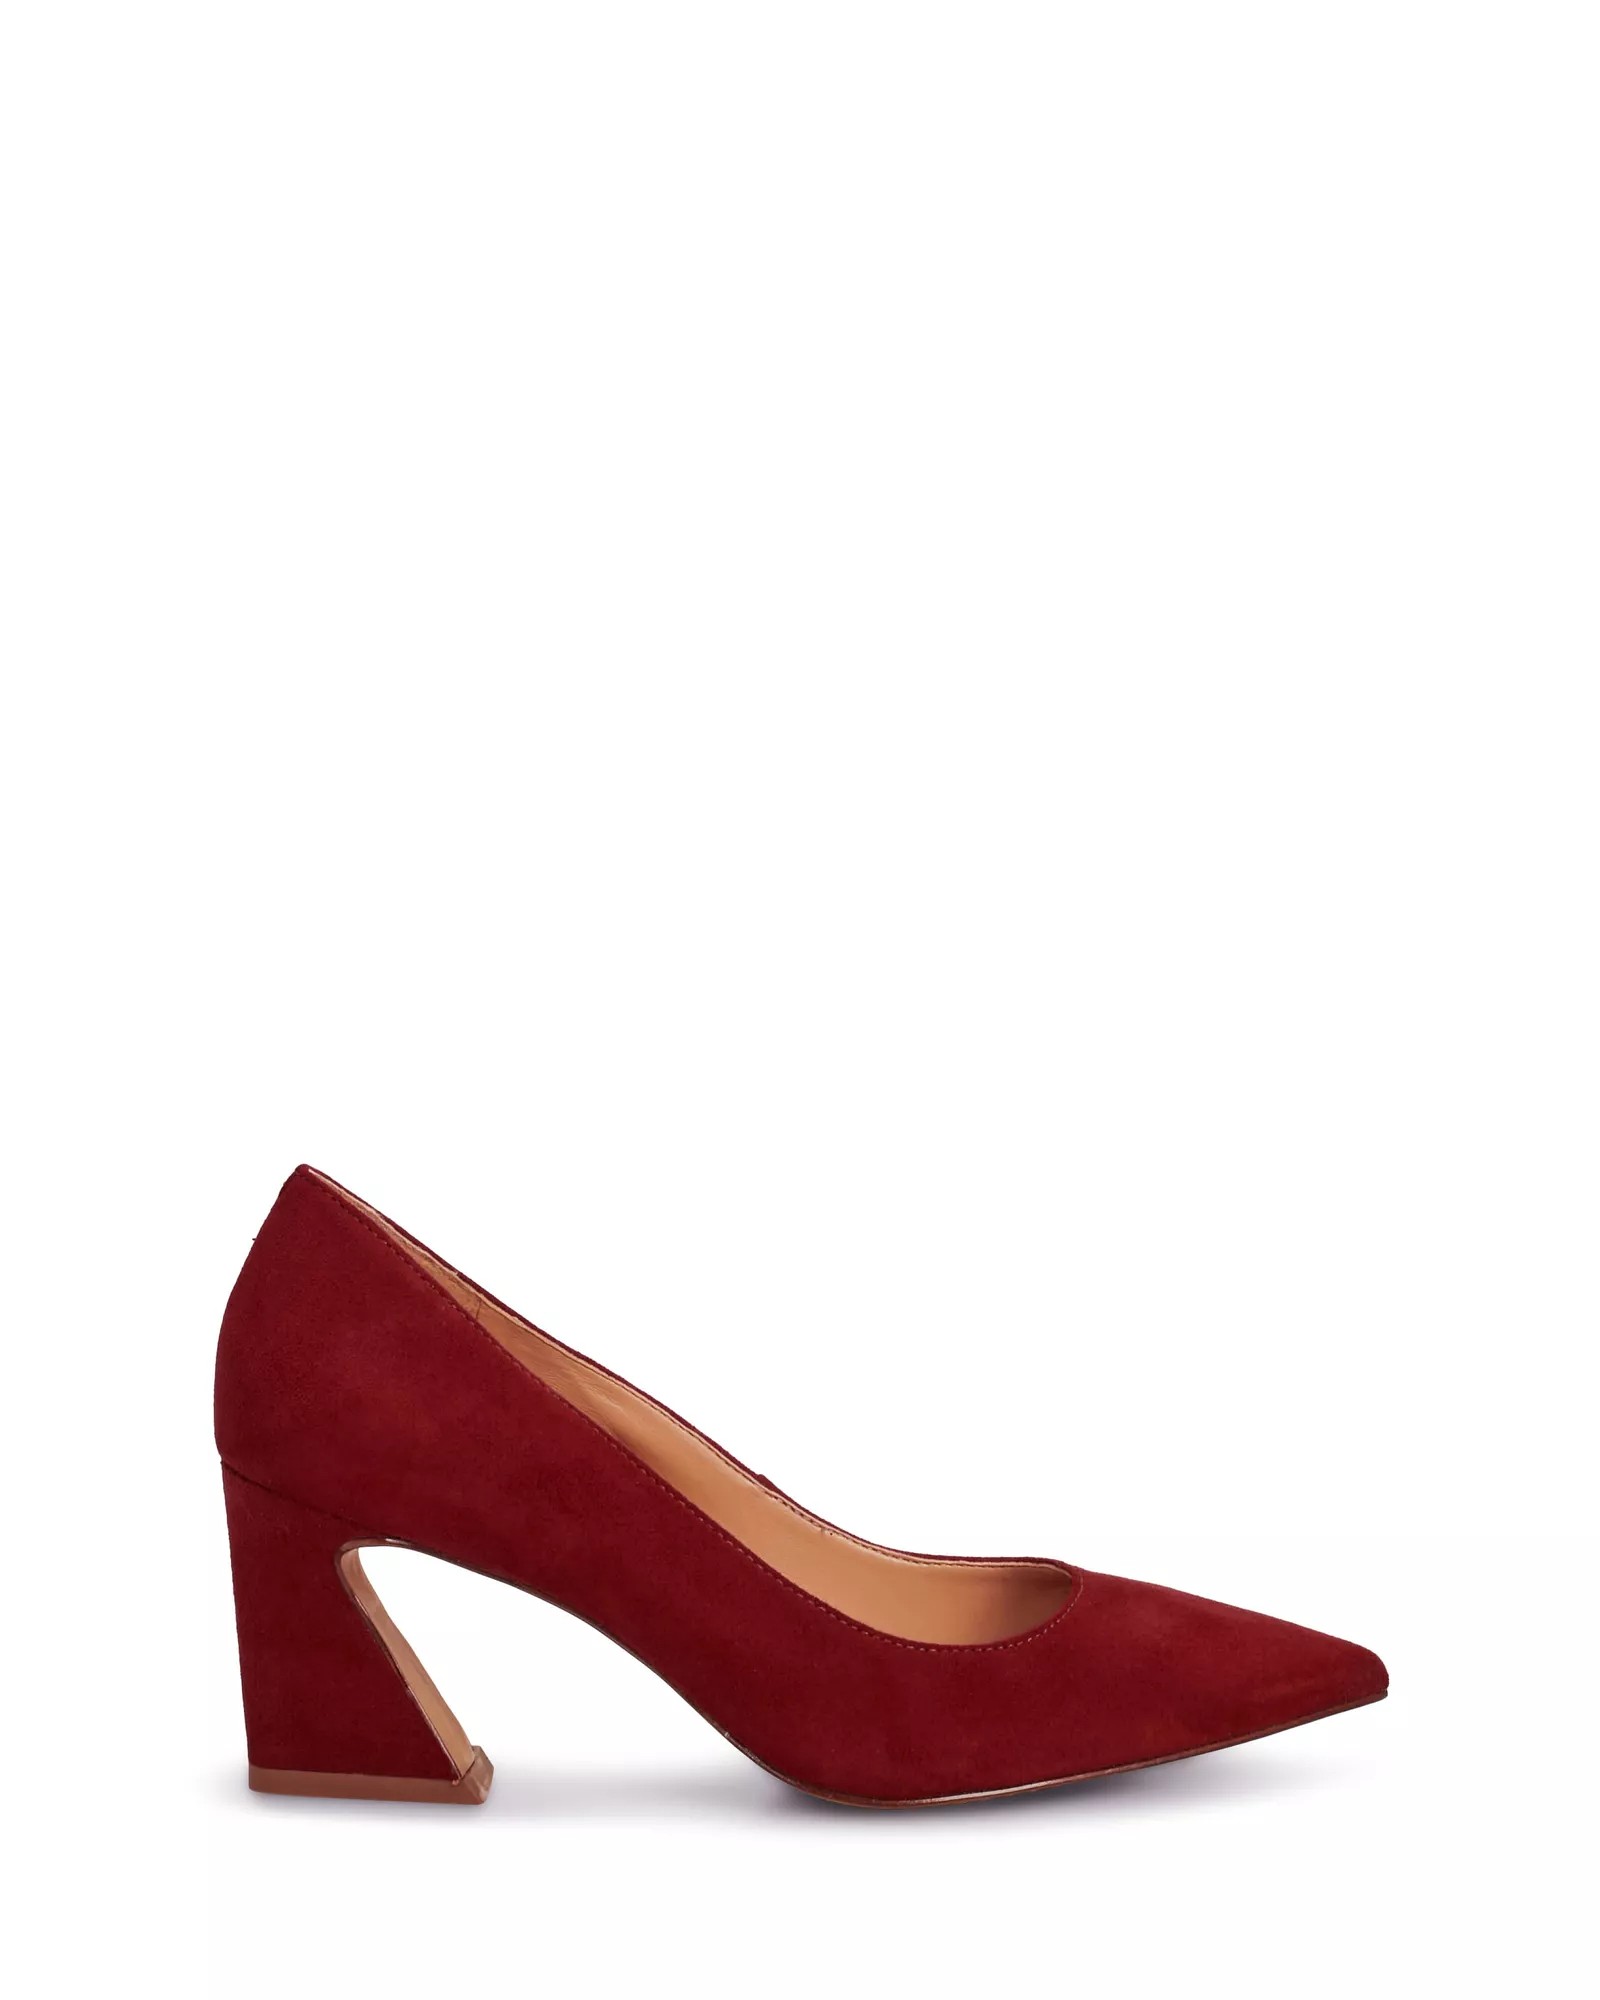 Women's Vince Camuto Hailenda Pumps Size 6 Red Currant Suede